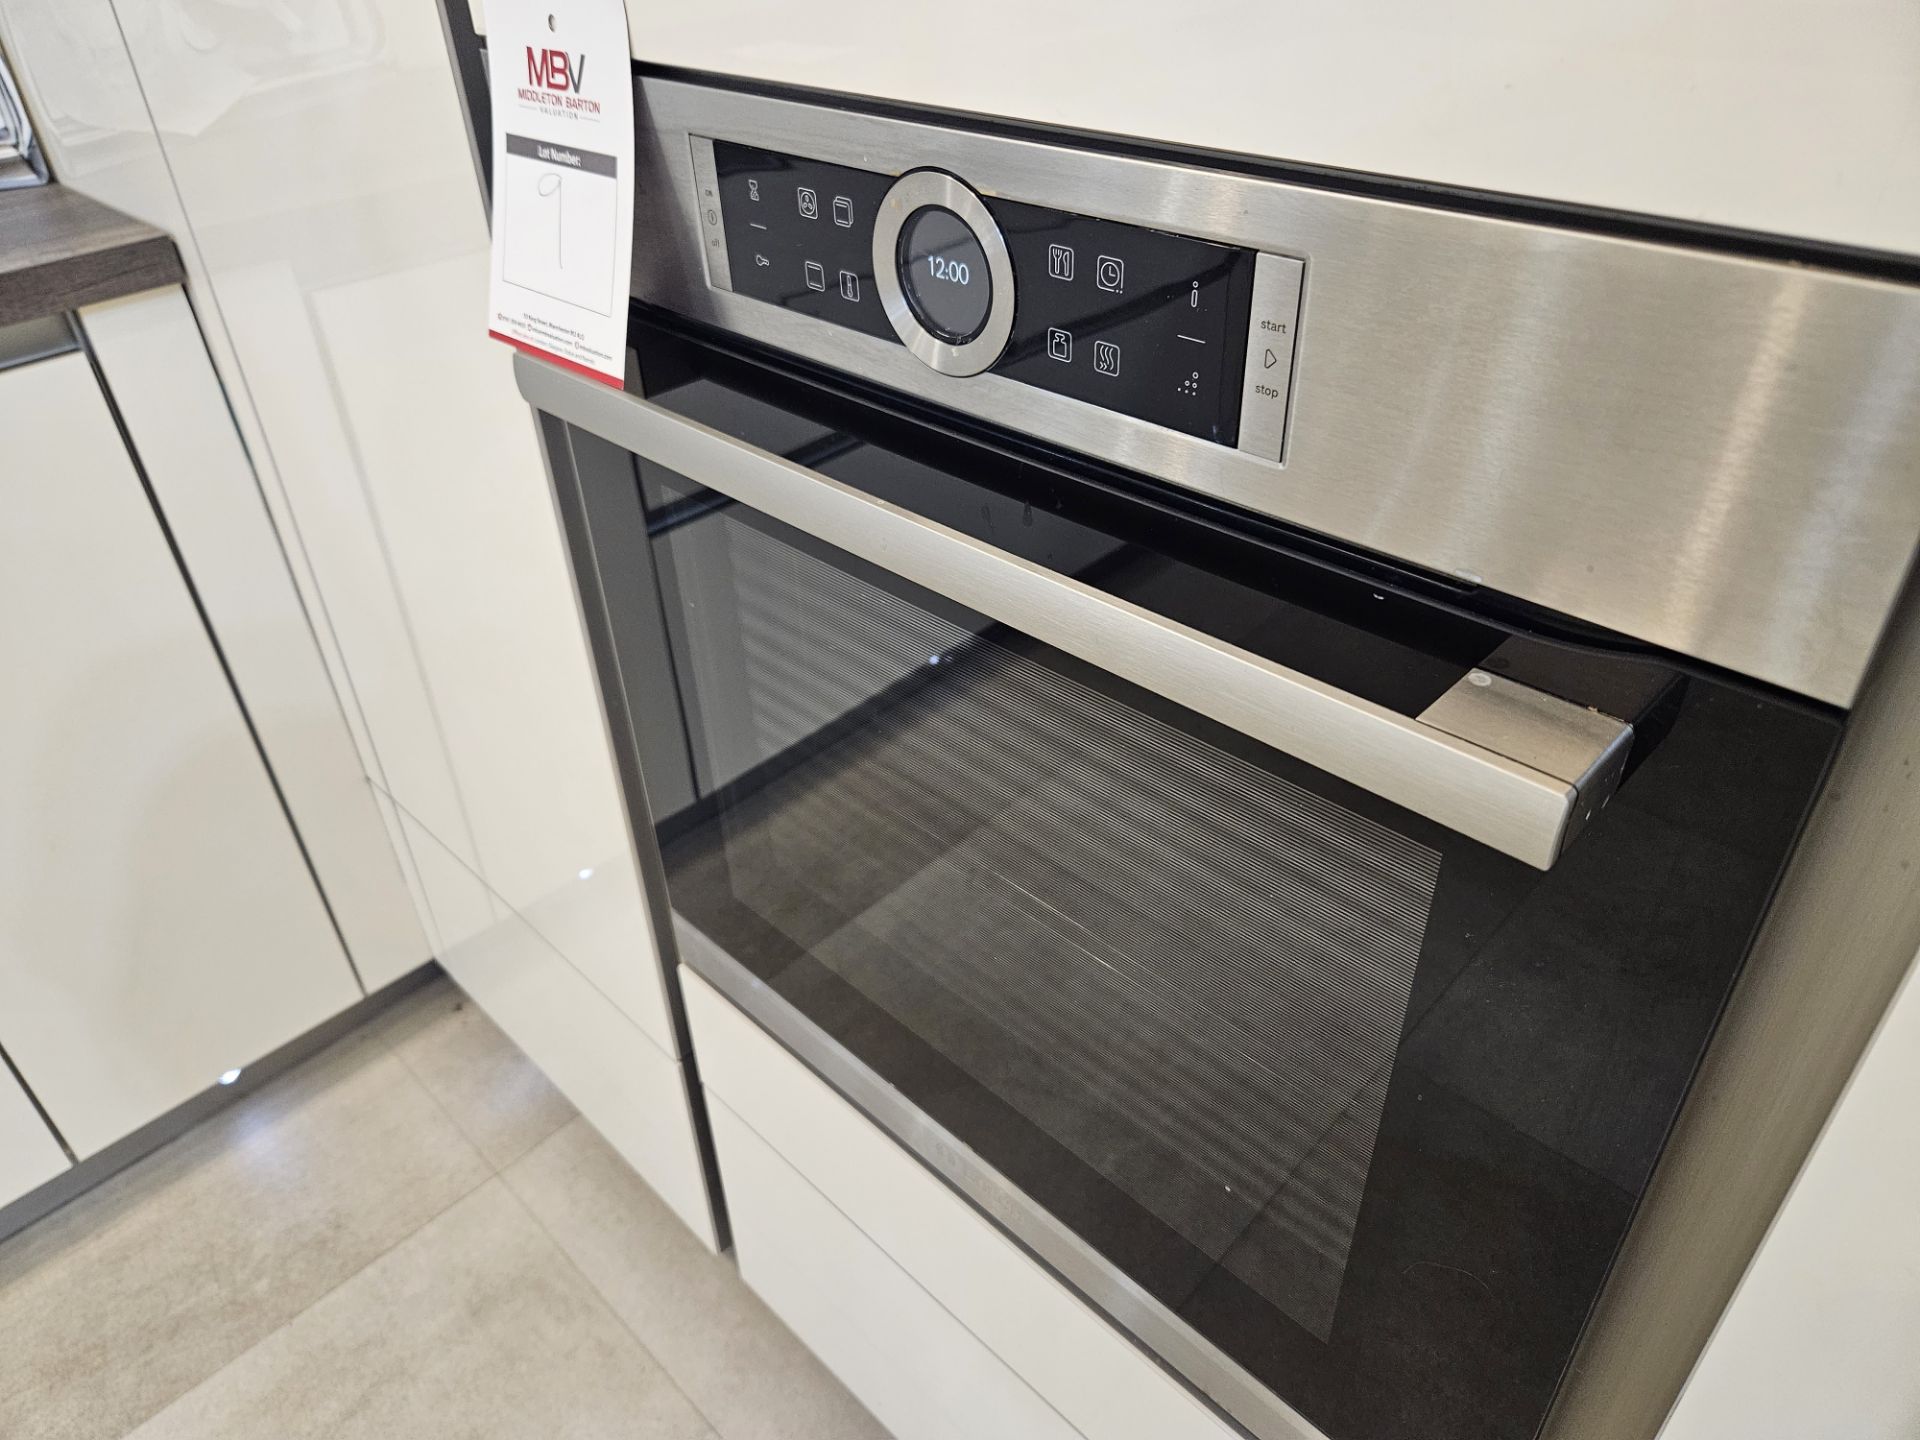 Bosch integrated electric oven - Image 2 of 2